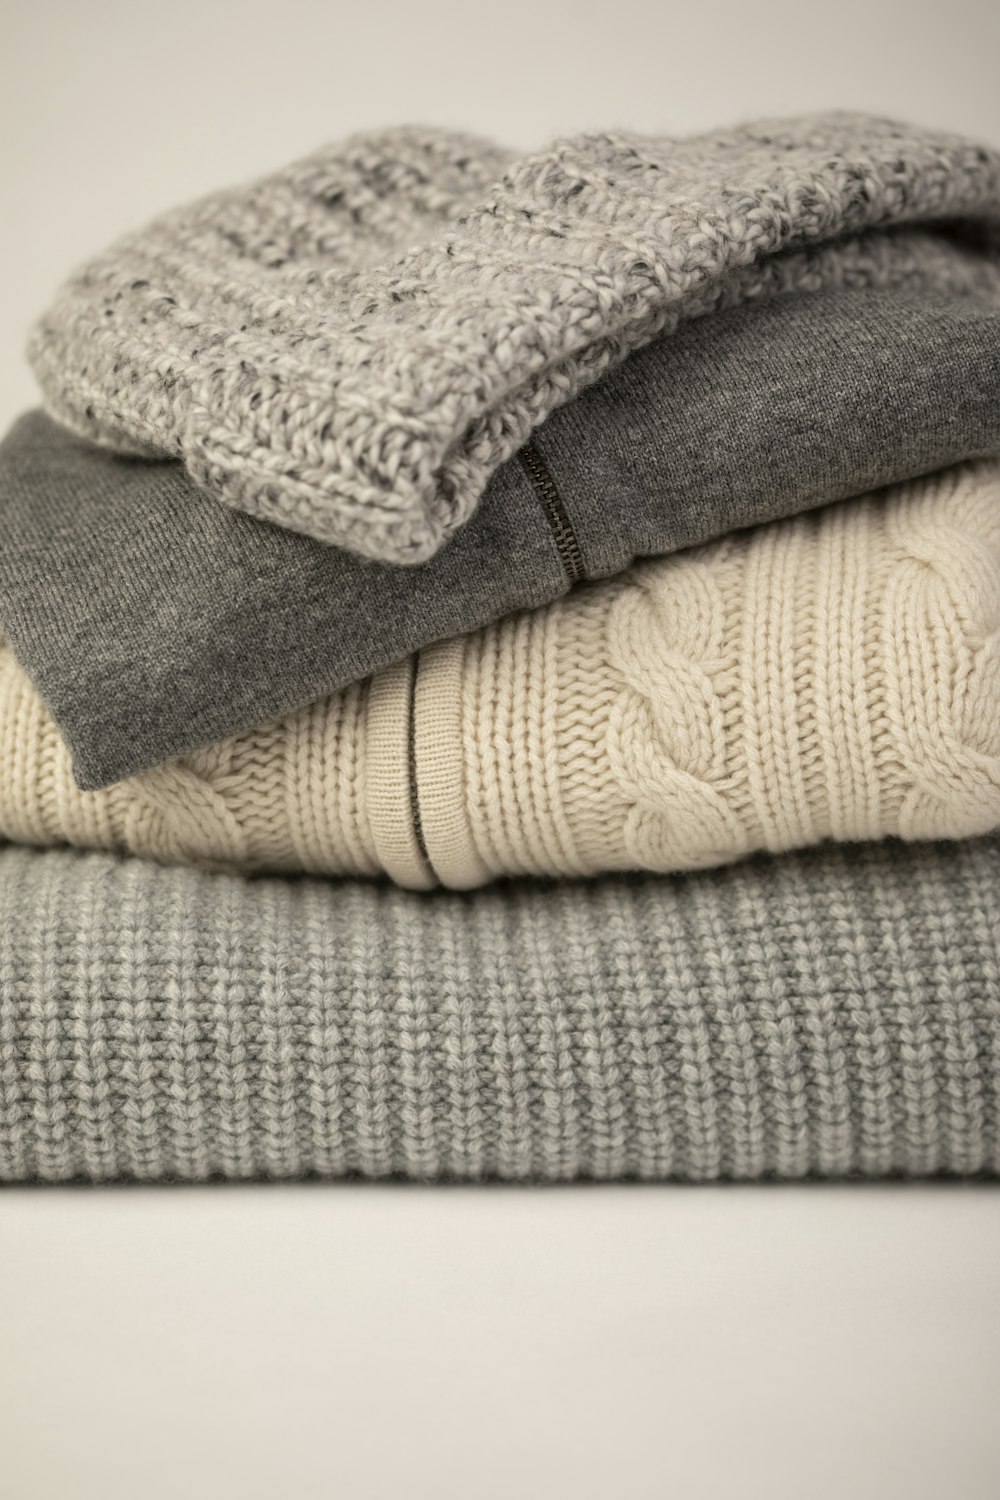 gray and white bath towels